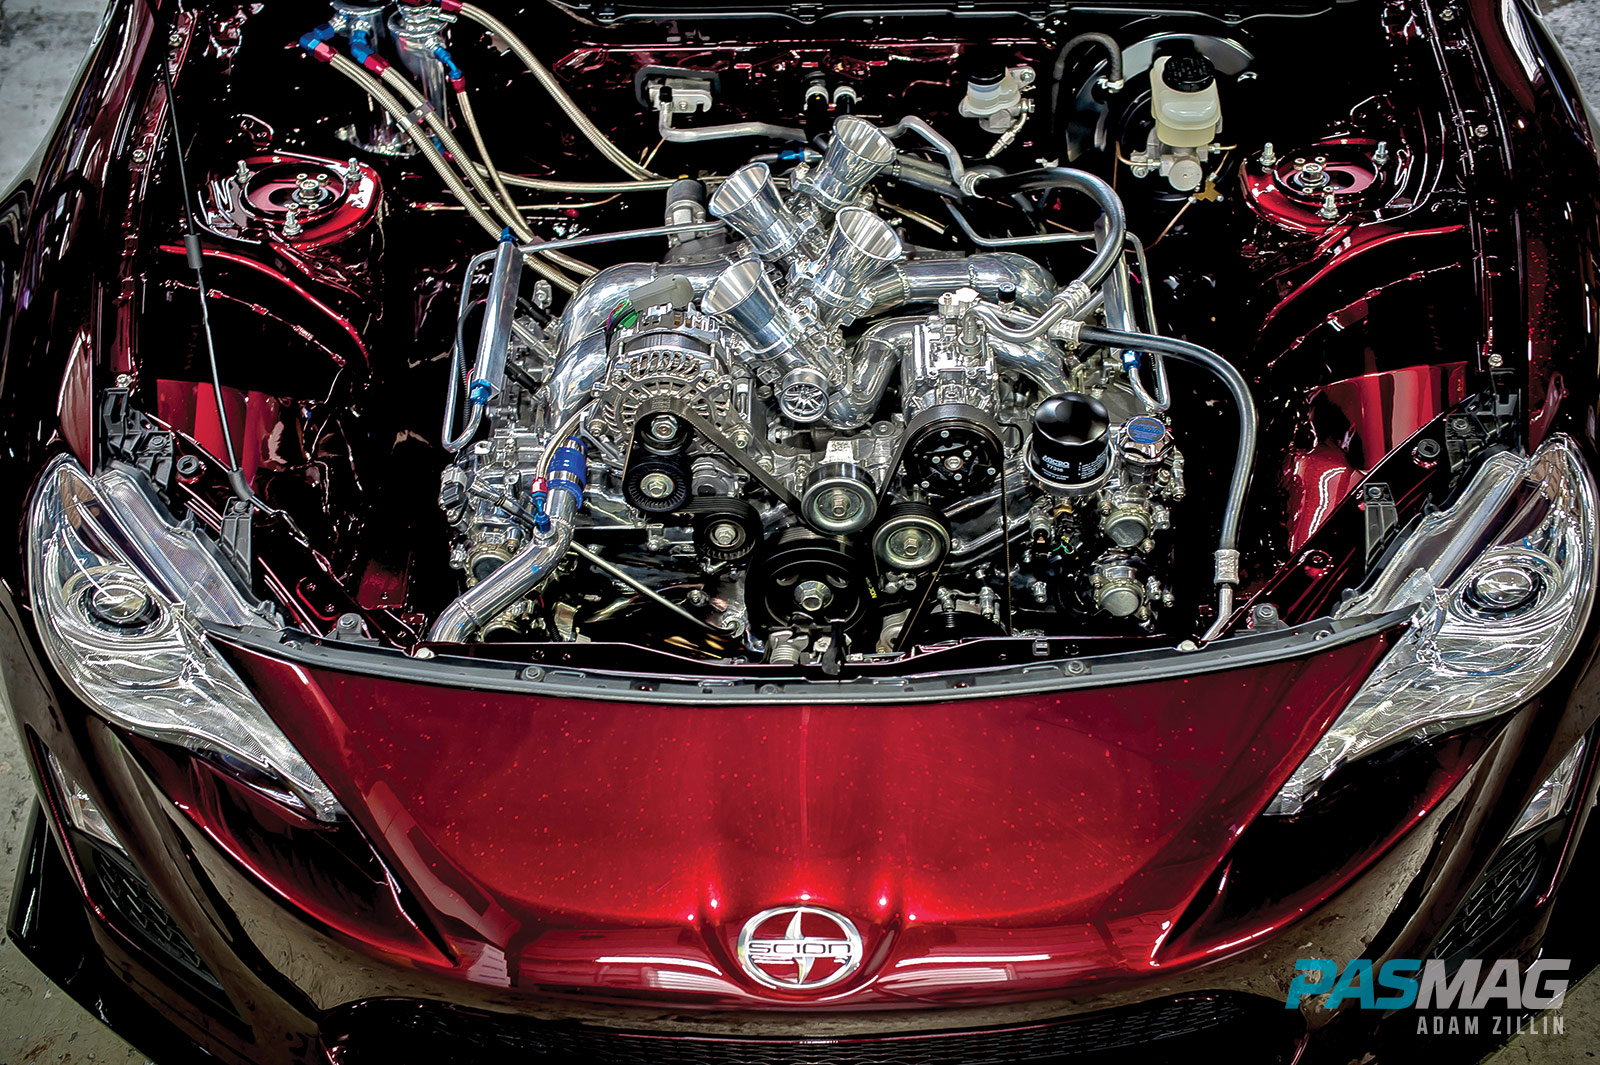 Out of this Weld: Atsushi Ito's Scion FR-S